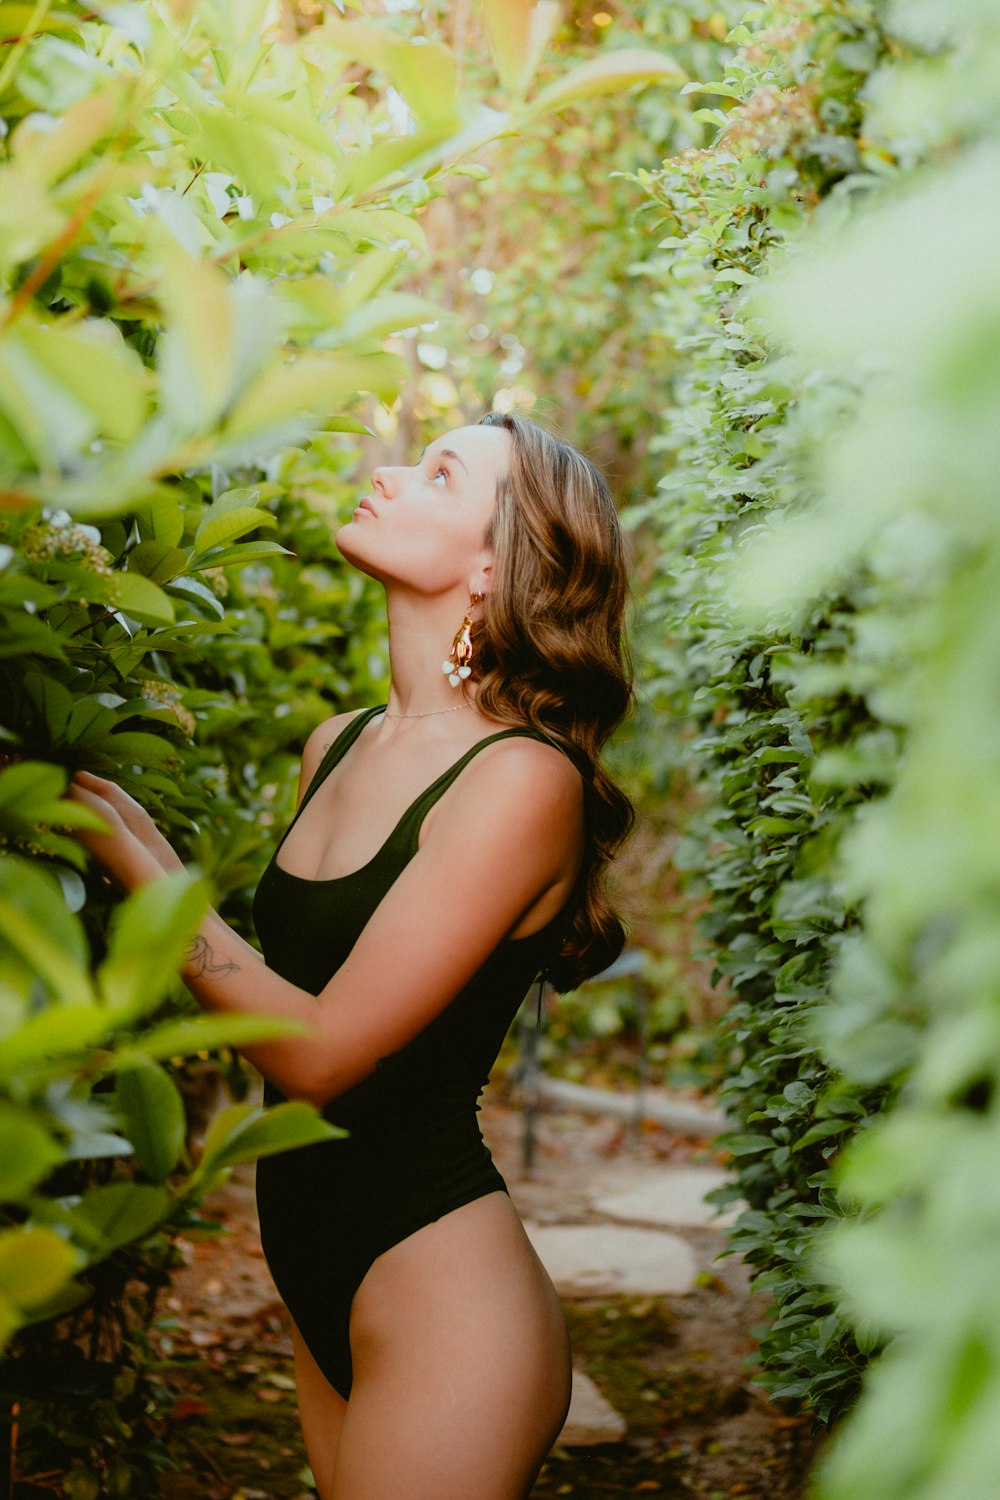 a woman in a black swimsuit standing in a garden